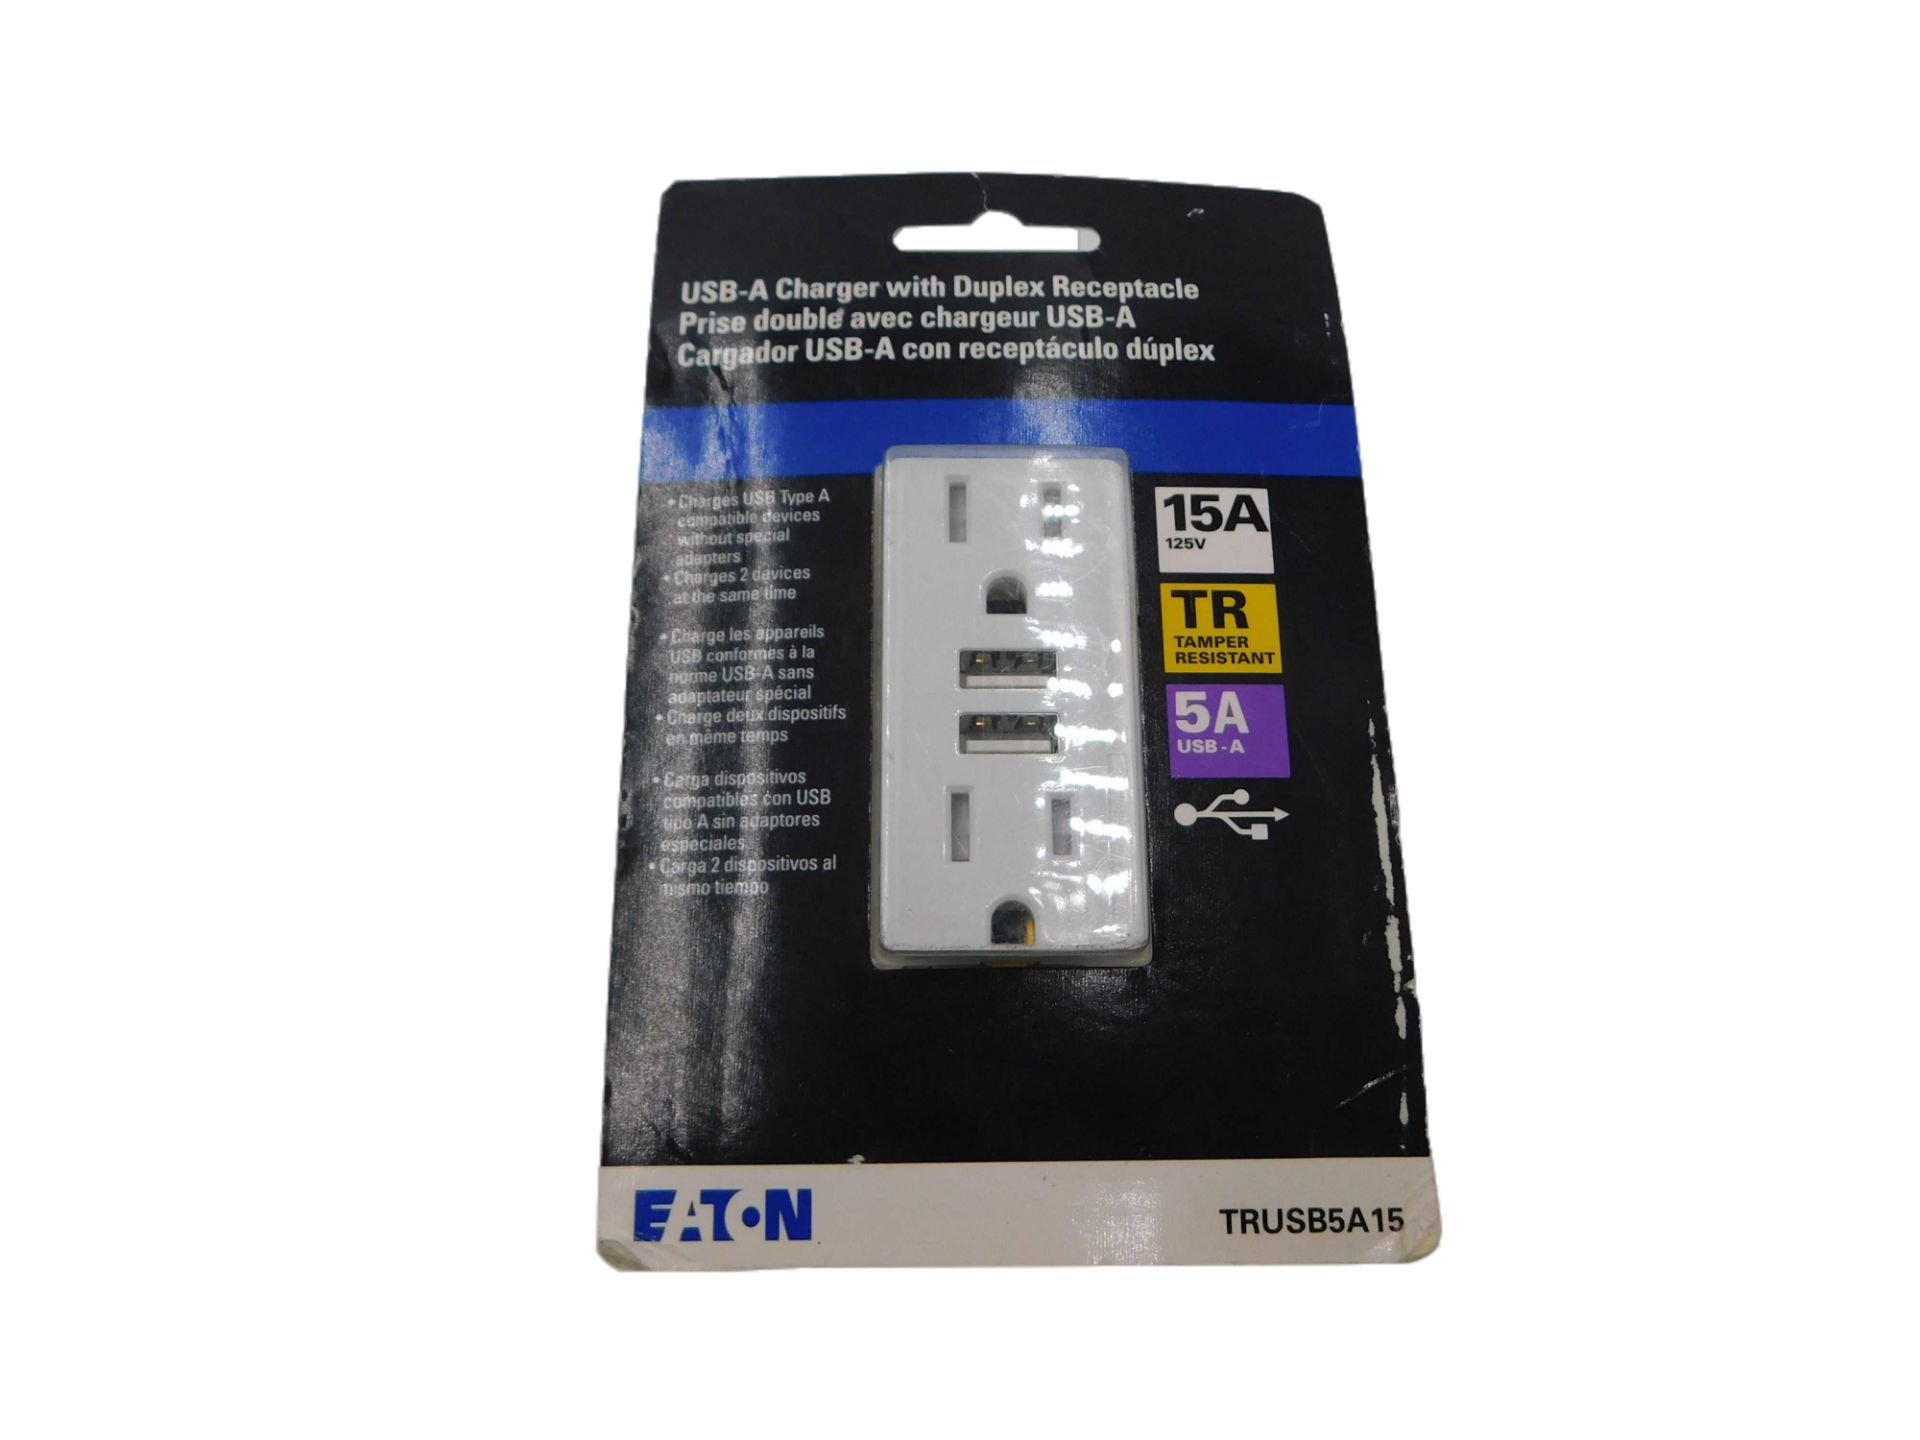 41x Eaton TRUSB5A15W-KB-LW Outlets Combination USB Charger/Duplex Receptacle 15A 125V White EA Tampe